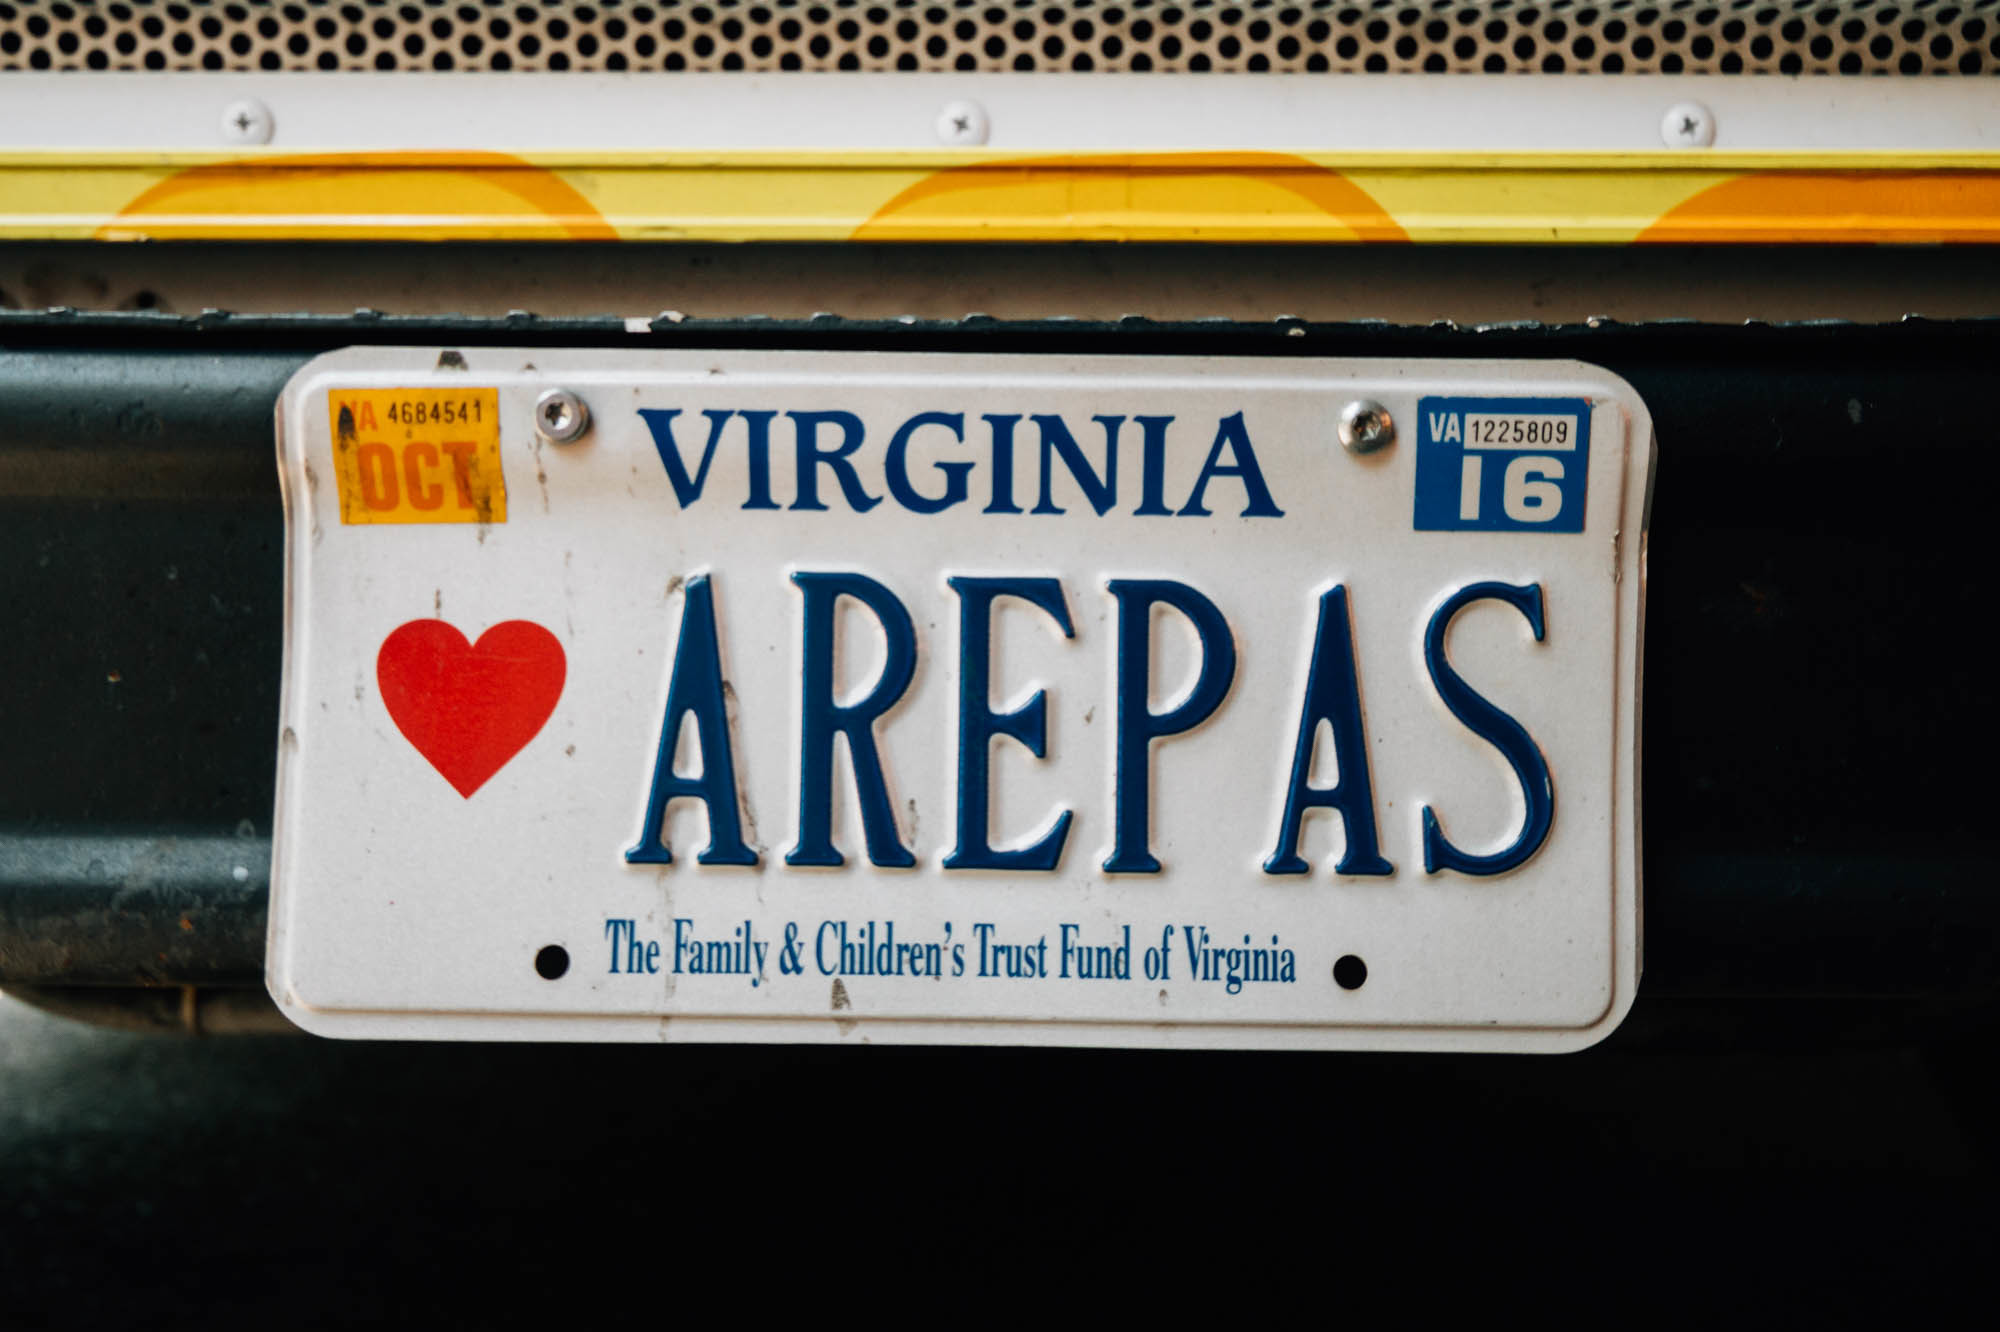 The license plate on the Arepa Zone food truck speaks for many as the arepa's popularity expands worldwide, even though it grows scarce in its native Venezuela.